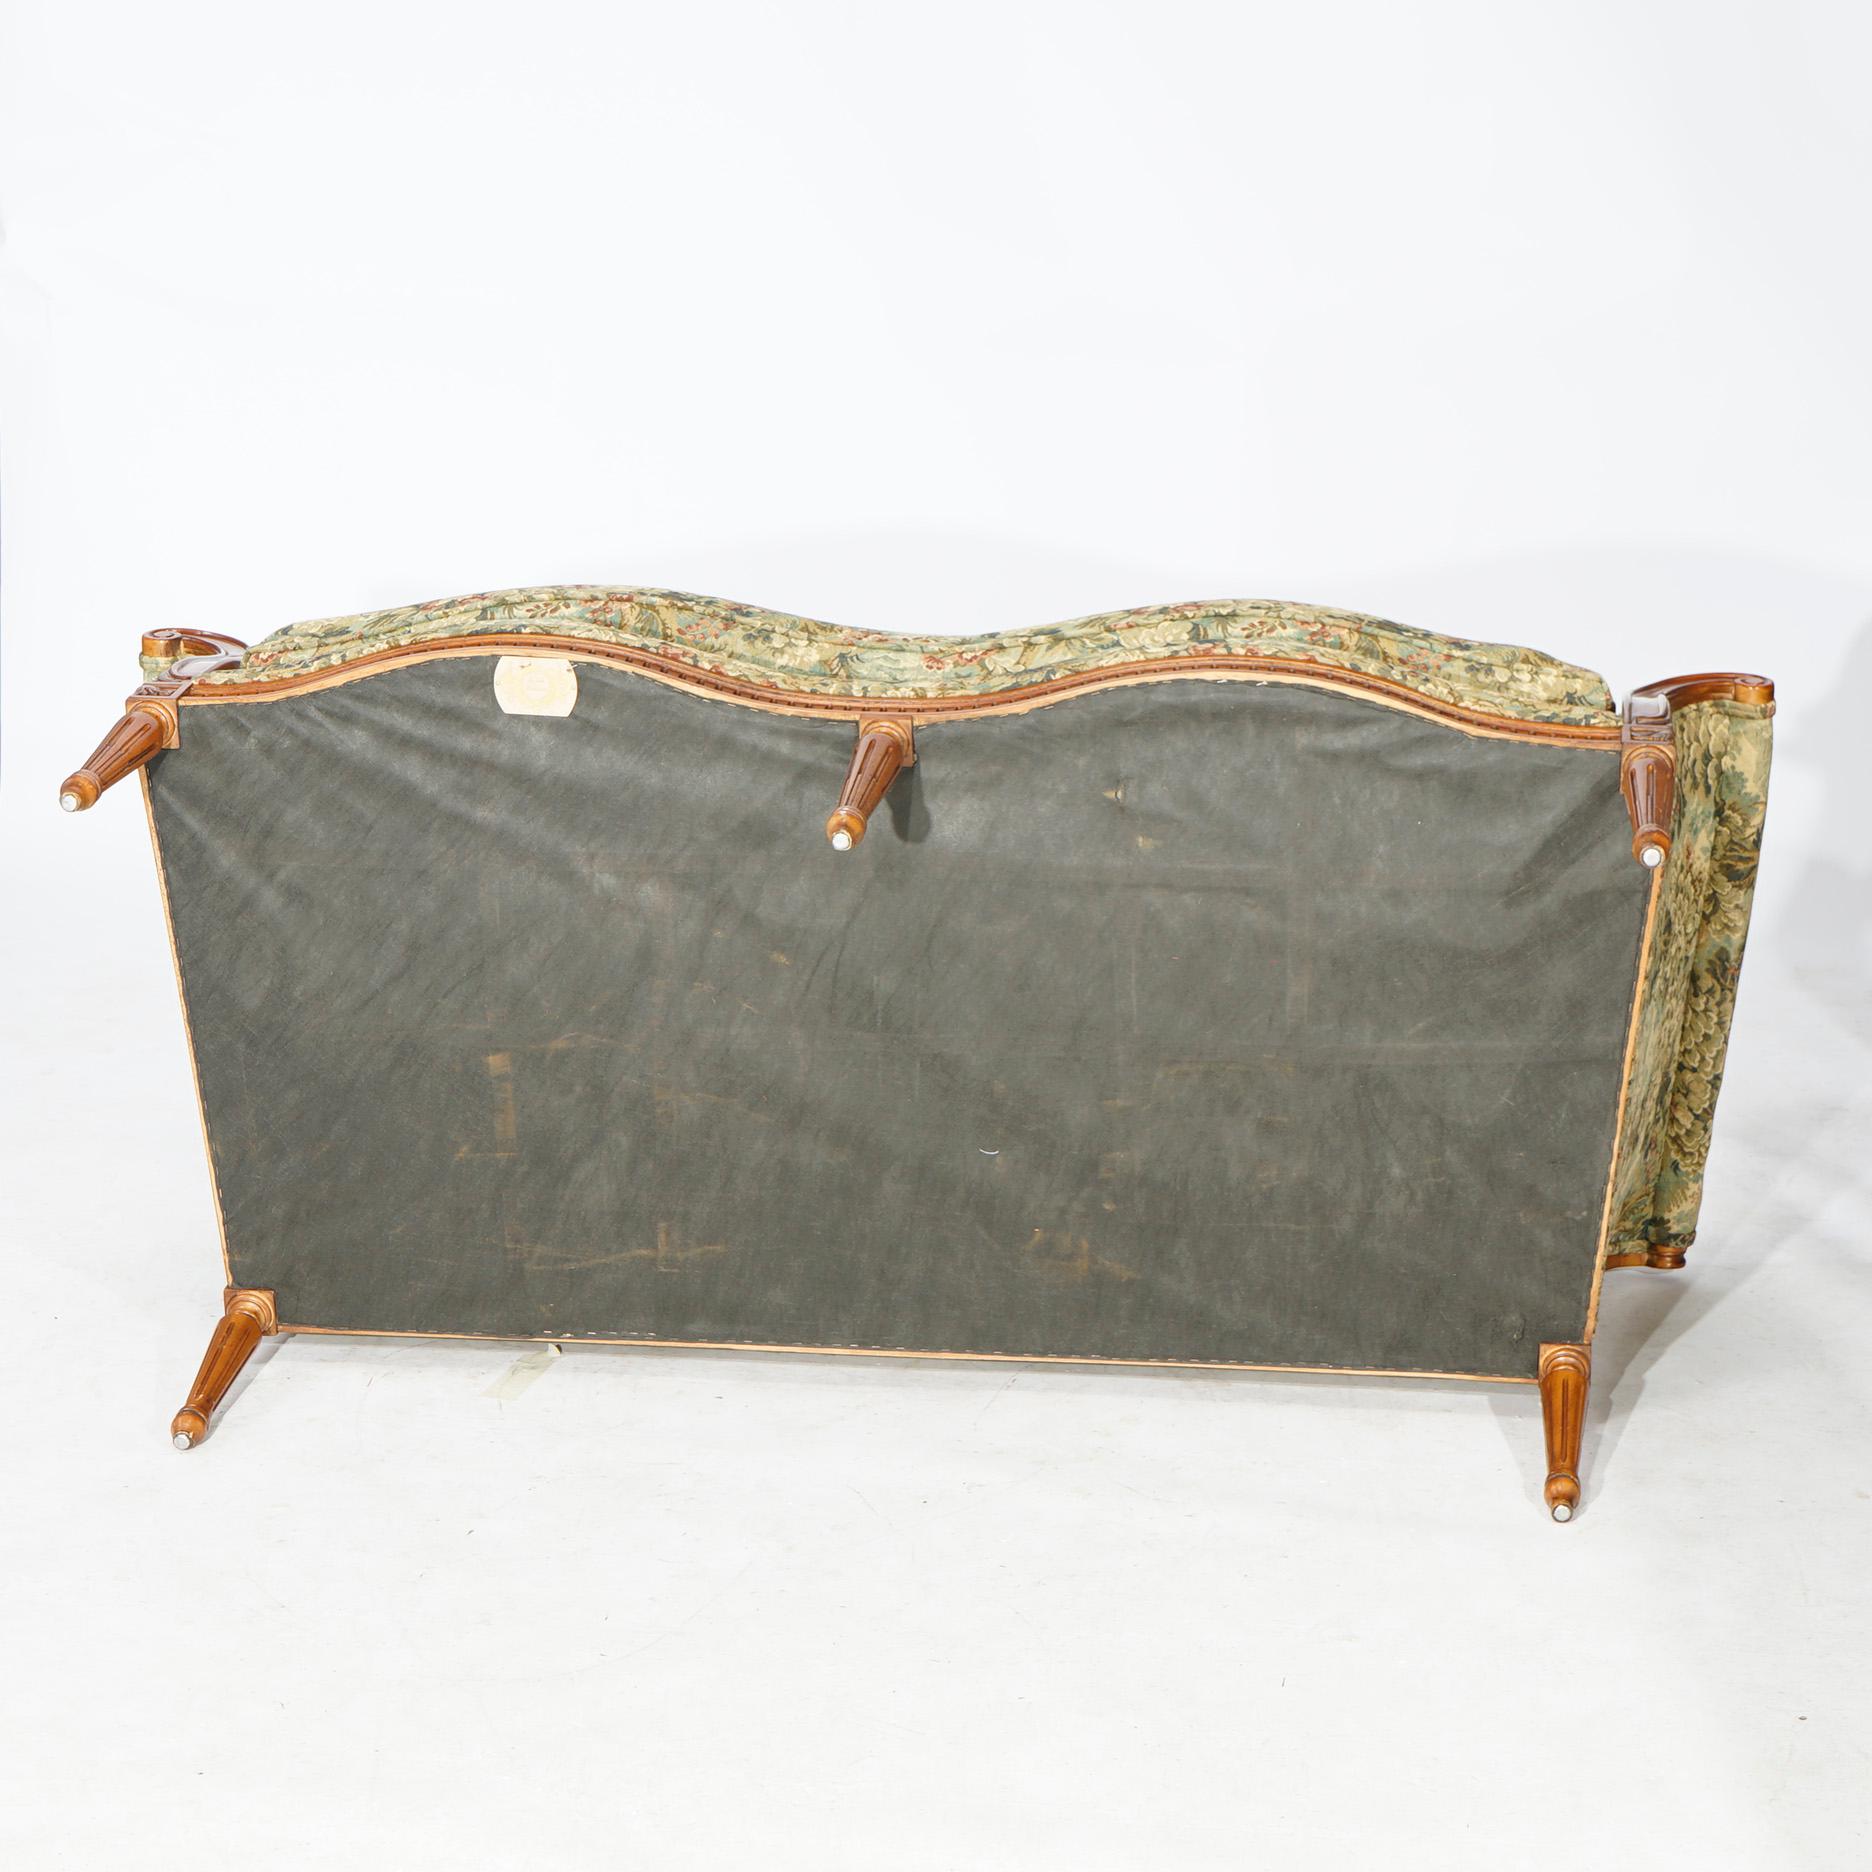 American Pair French Style John Widdicomb Furniture Company Upholstered Settees, 20th C.